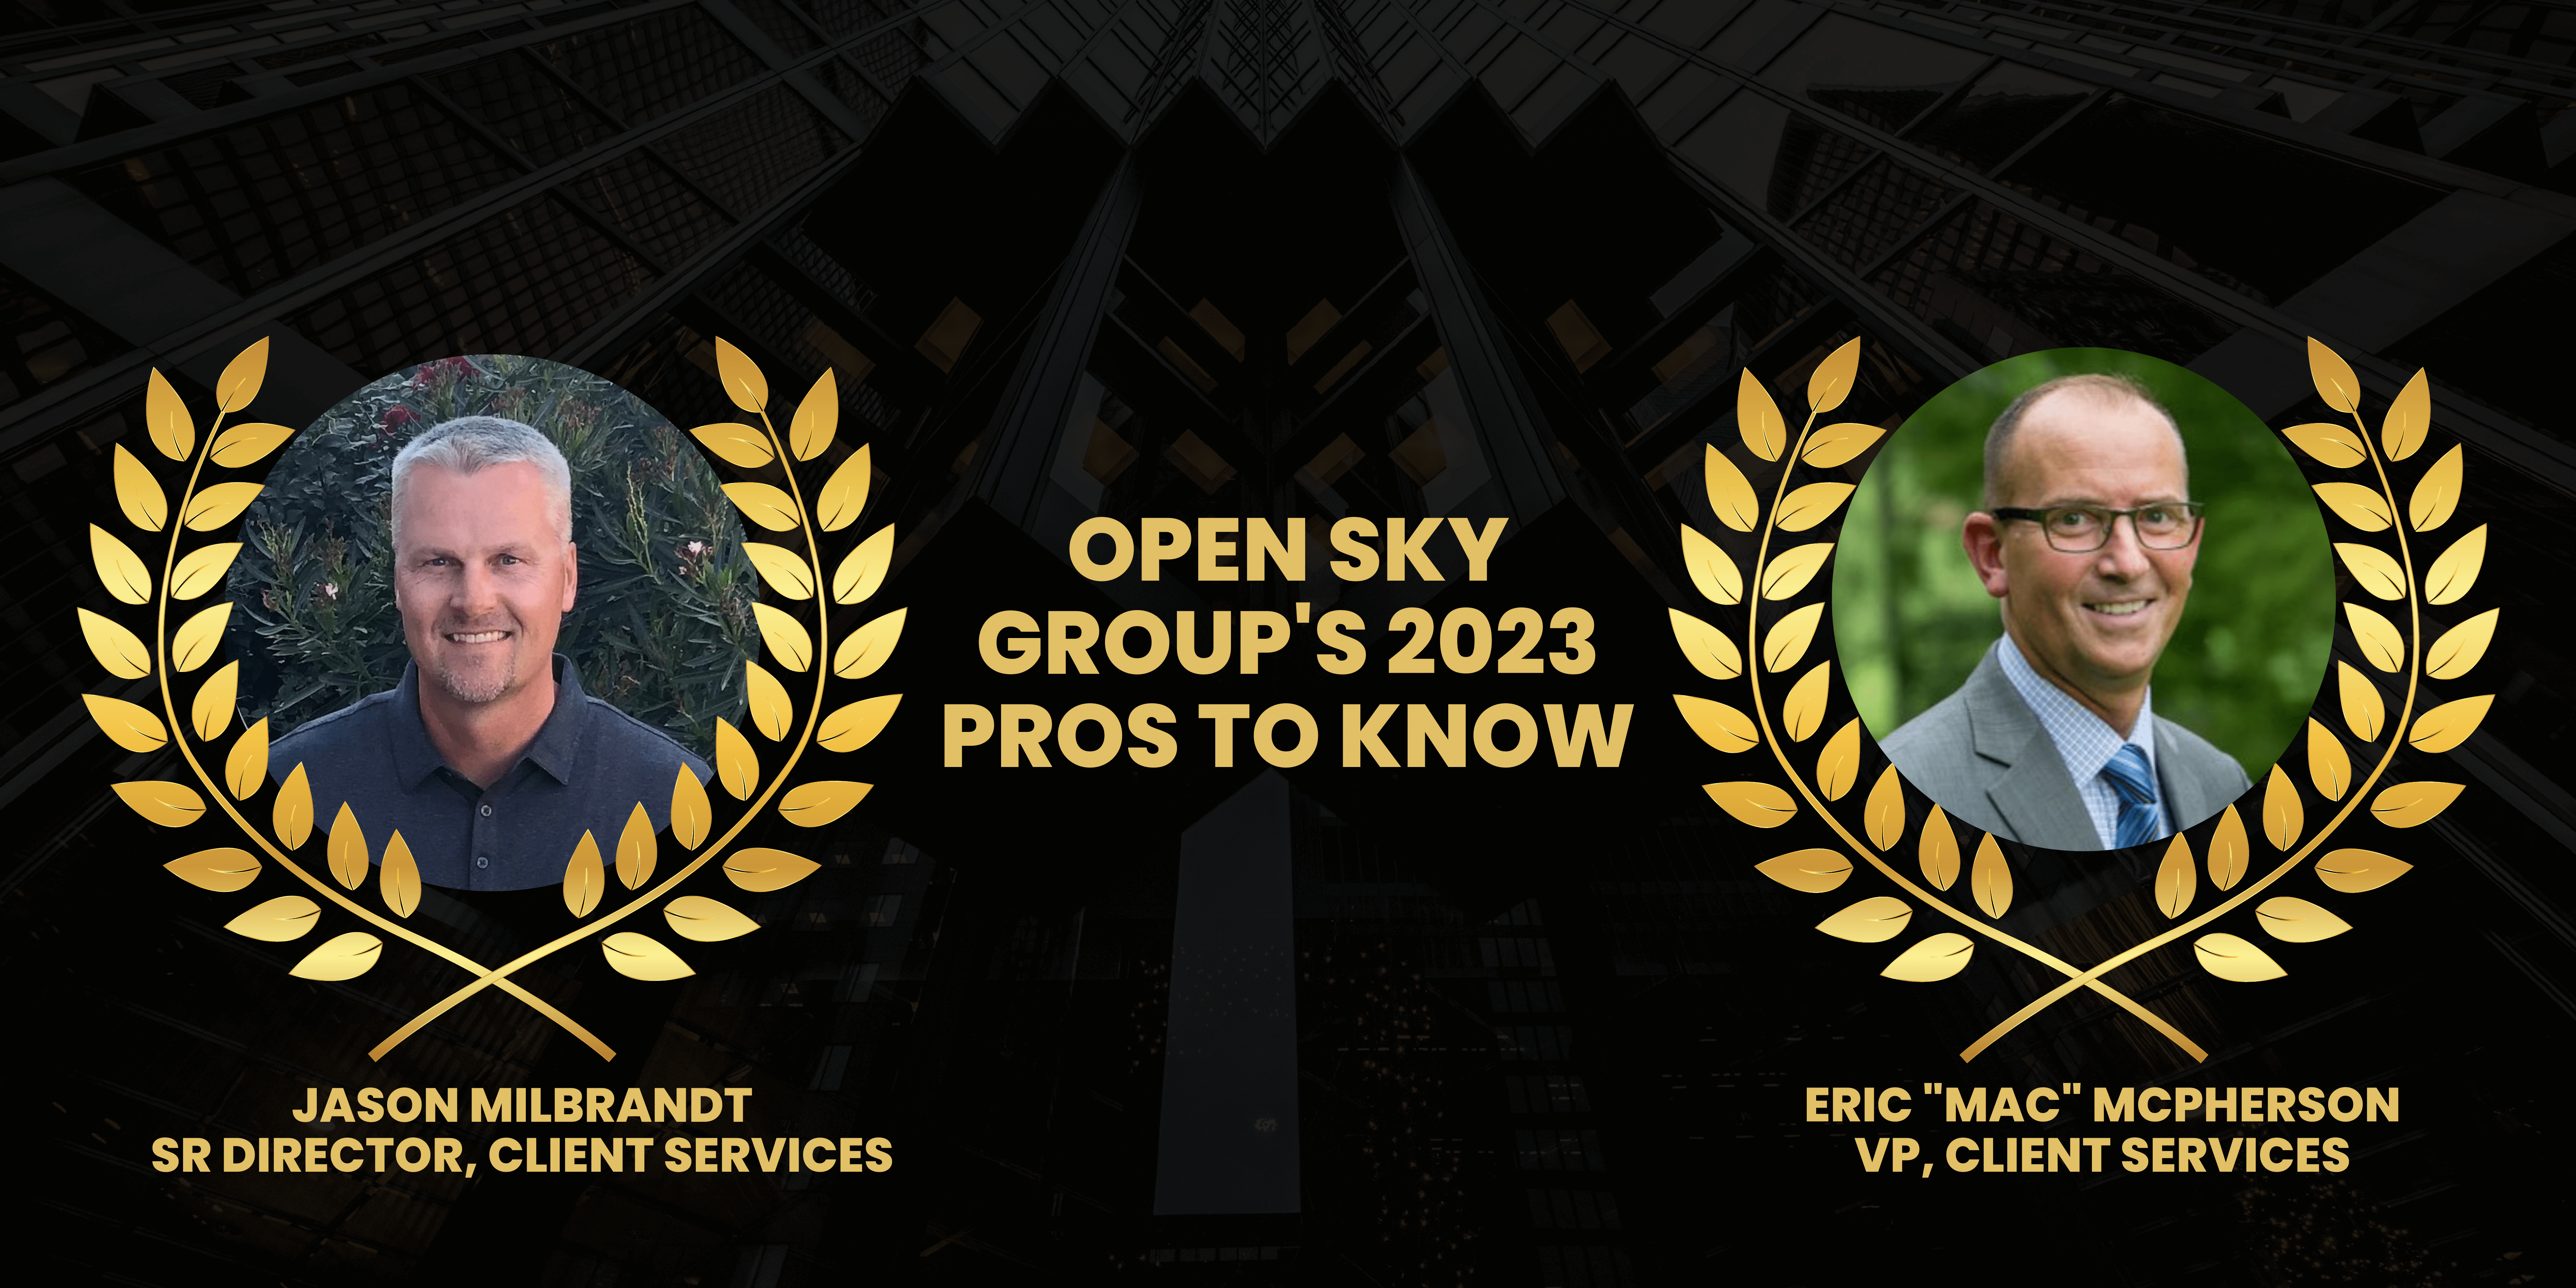 Open Sky Group's 2023 Pros to Know